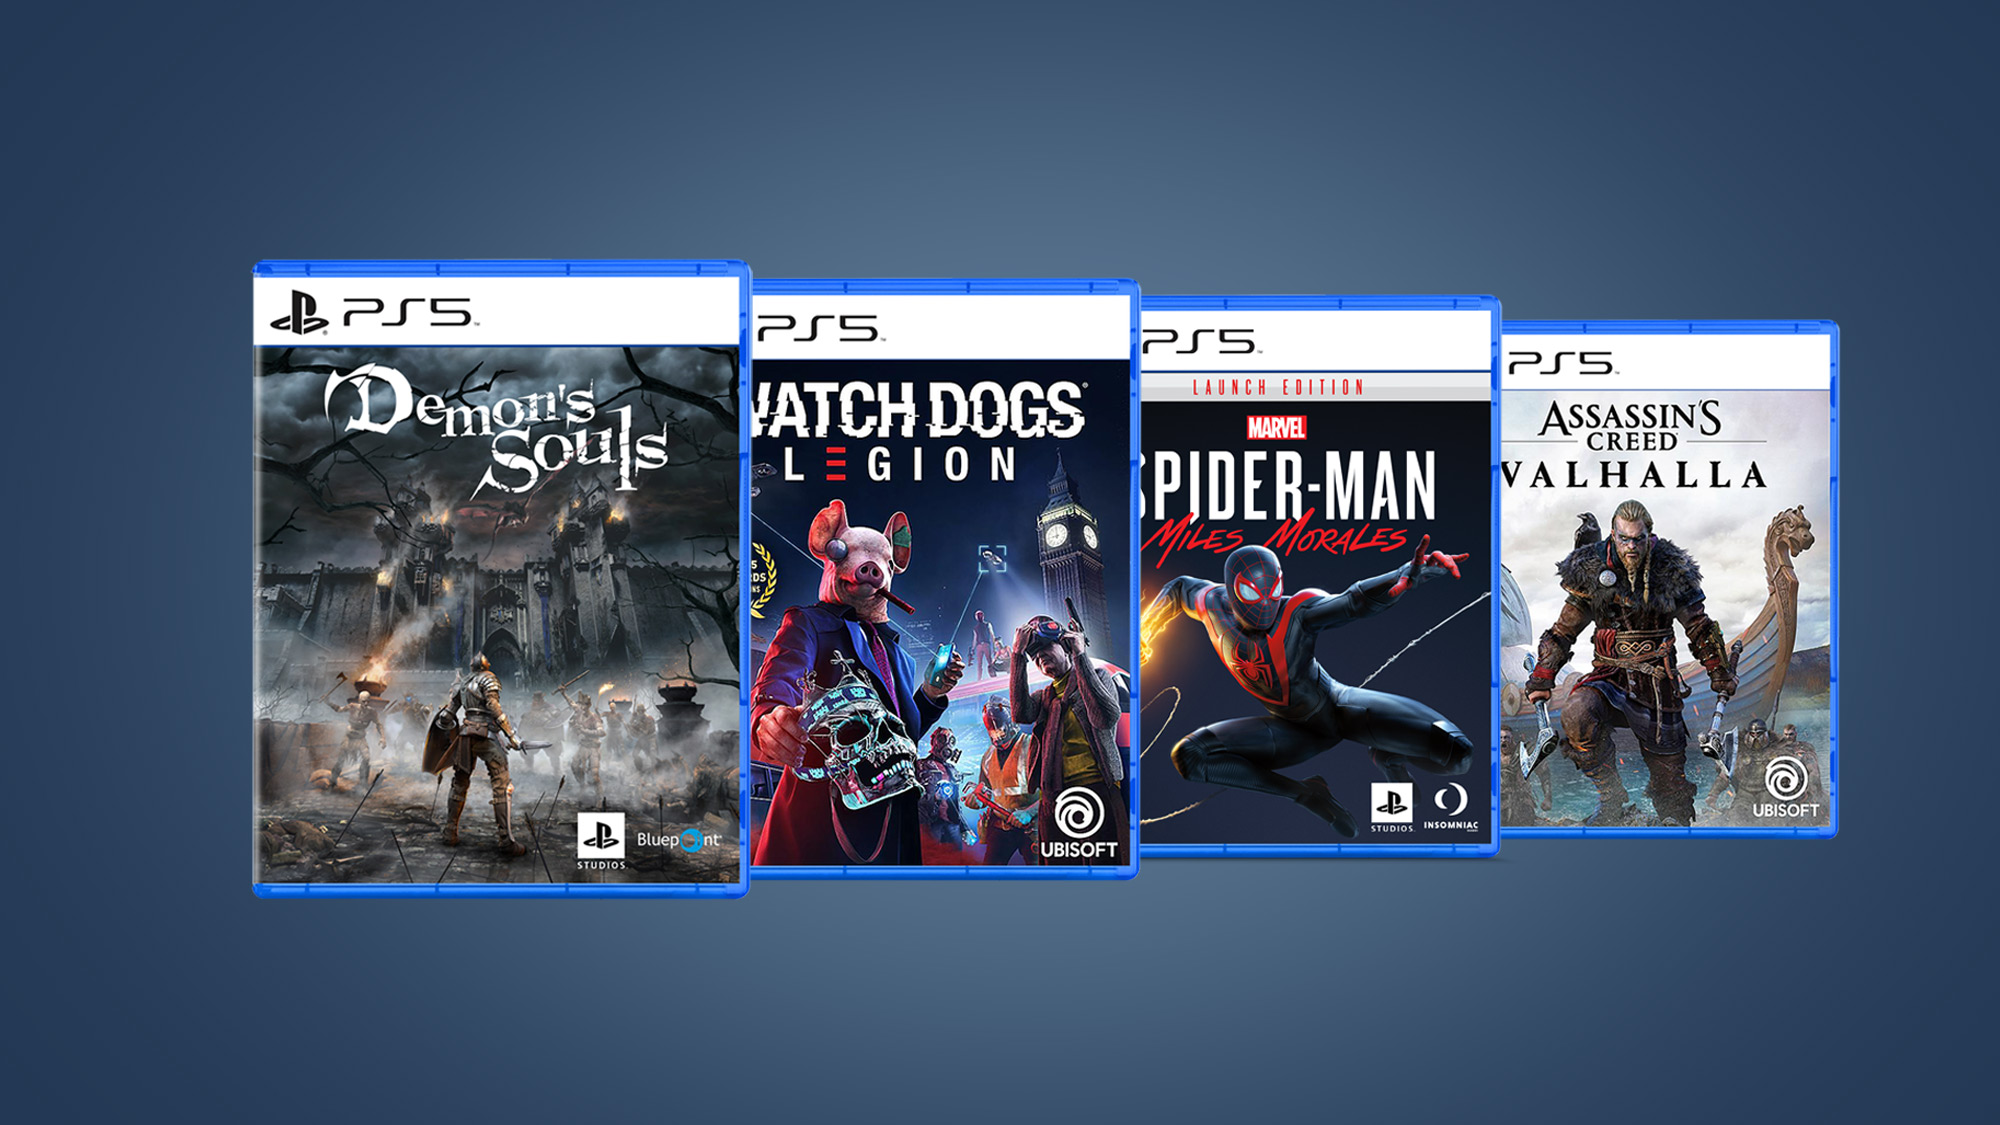 next ps4 game sale